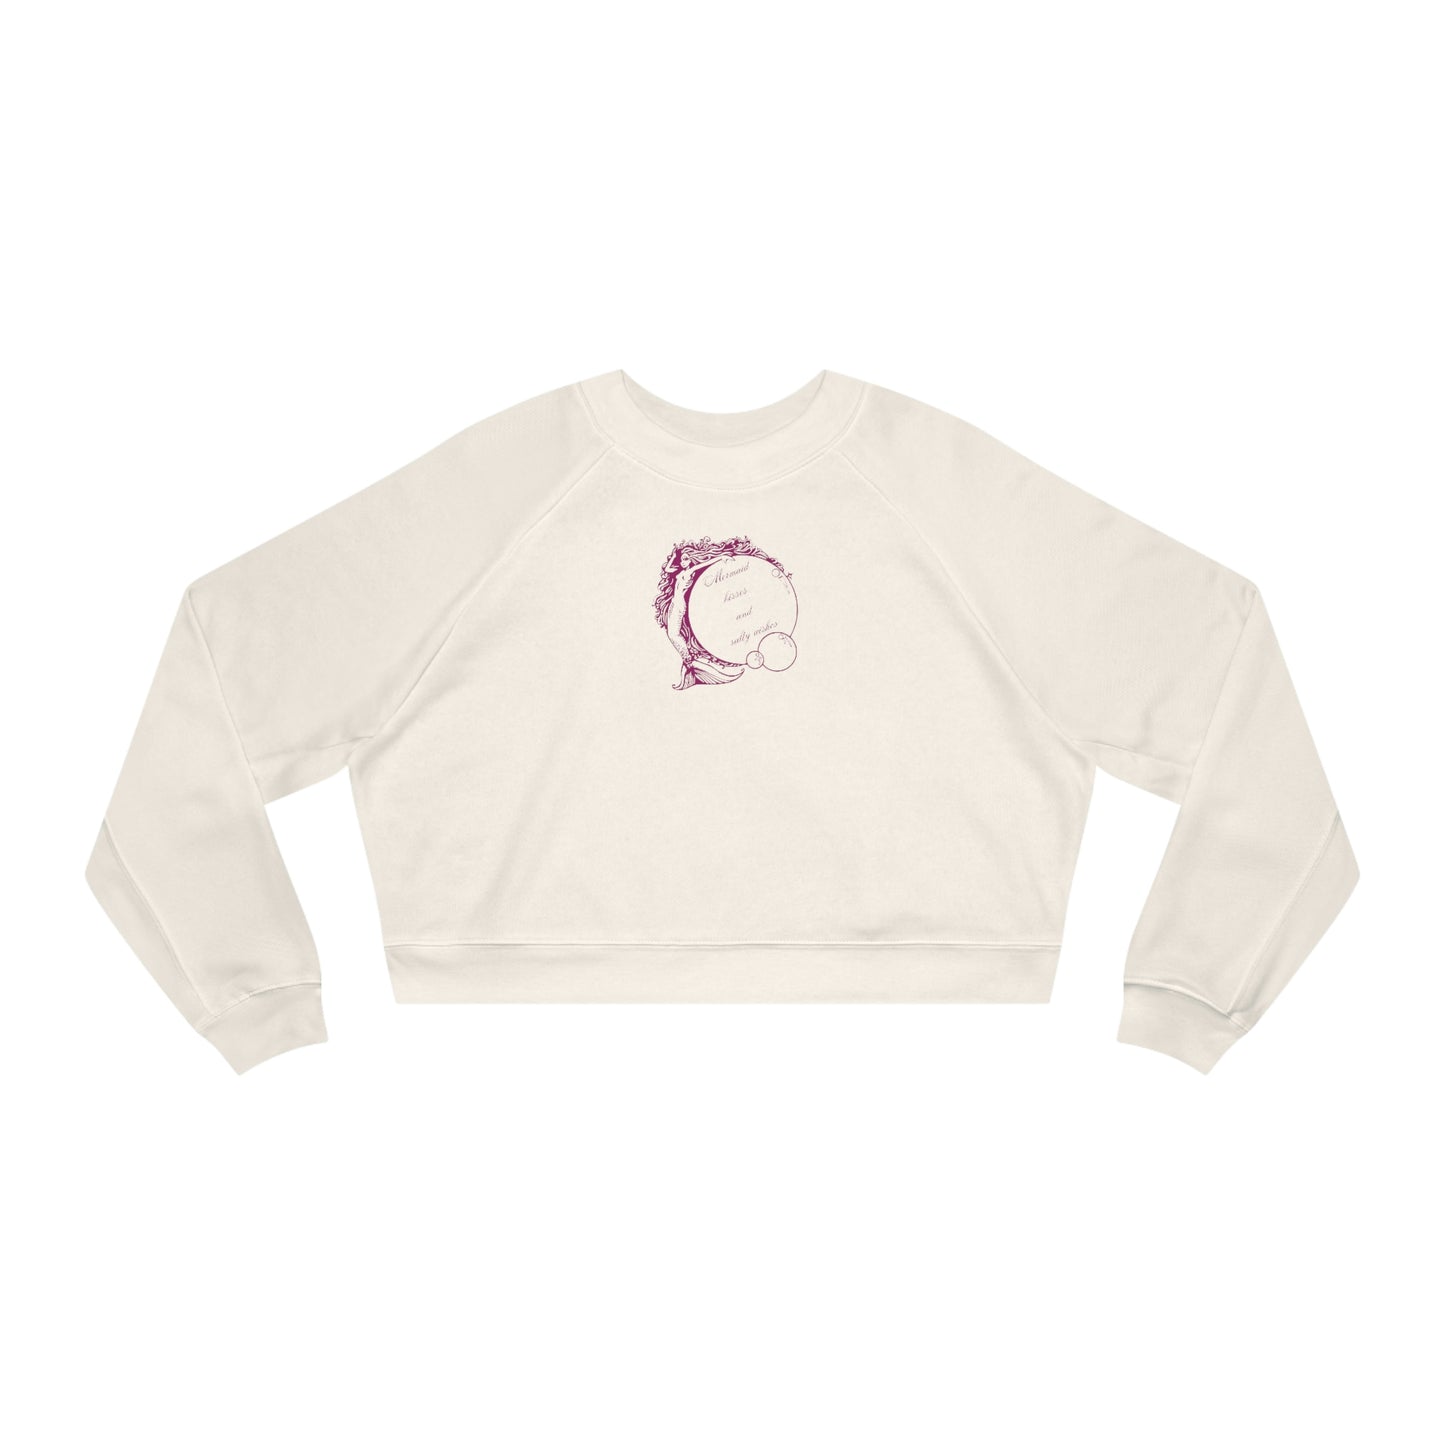 ‘Mermaid Kisses and Salty Wishes.’ Printed Front & Back.  Women's Cropped Fleece Pullover